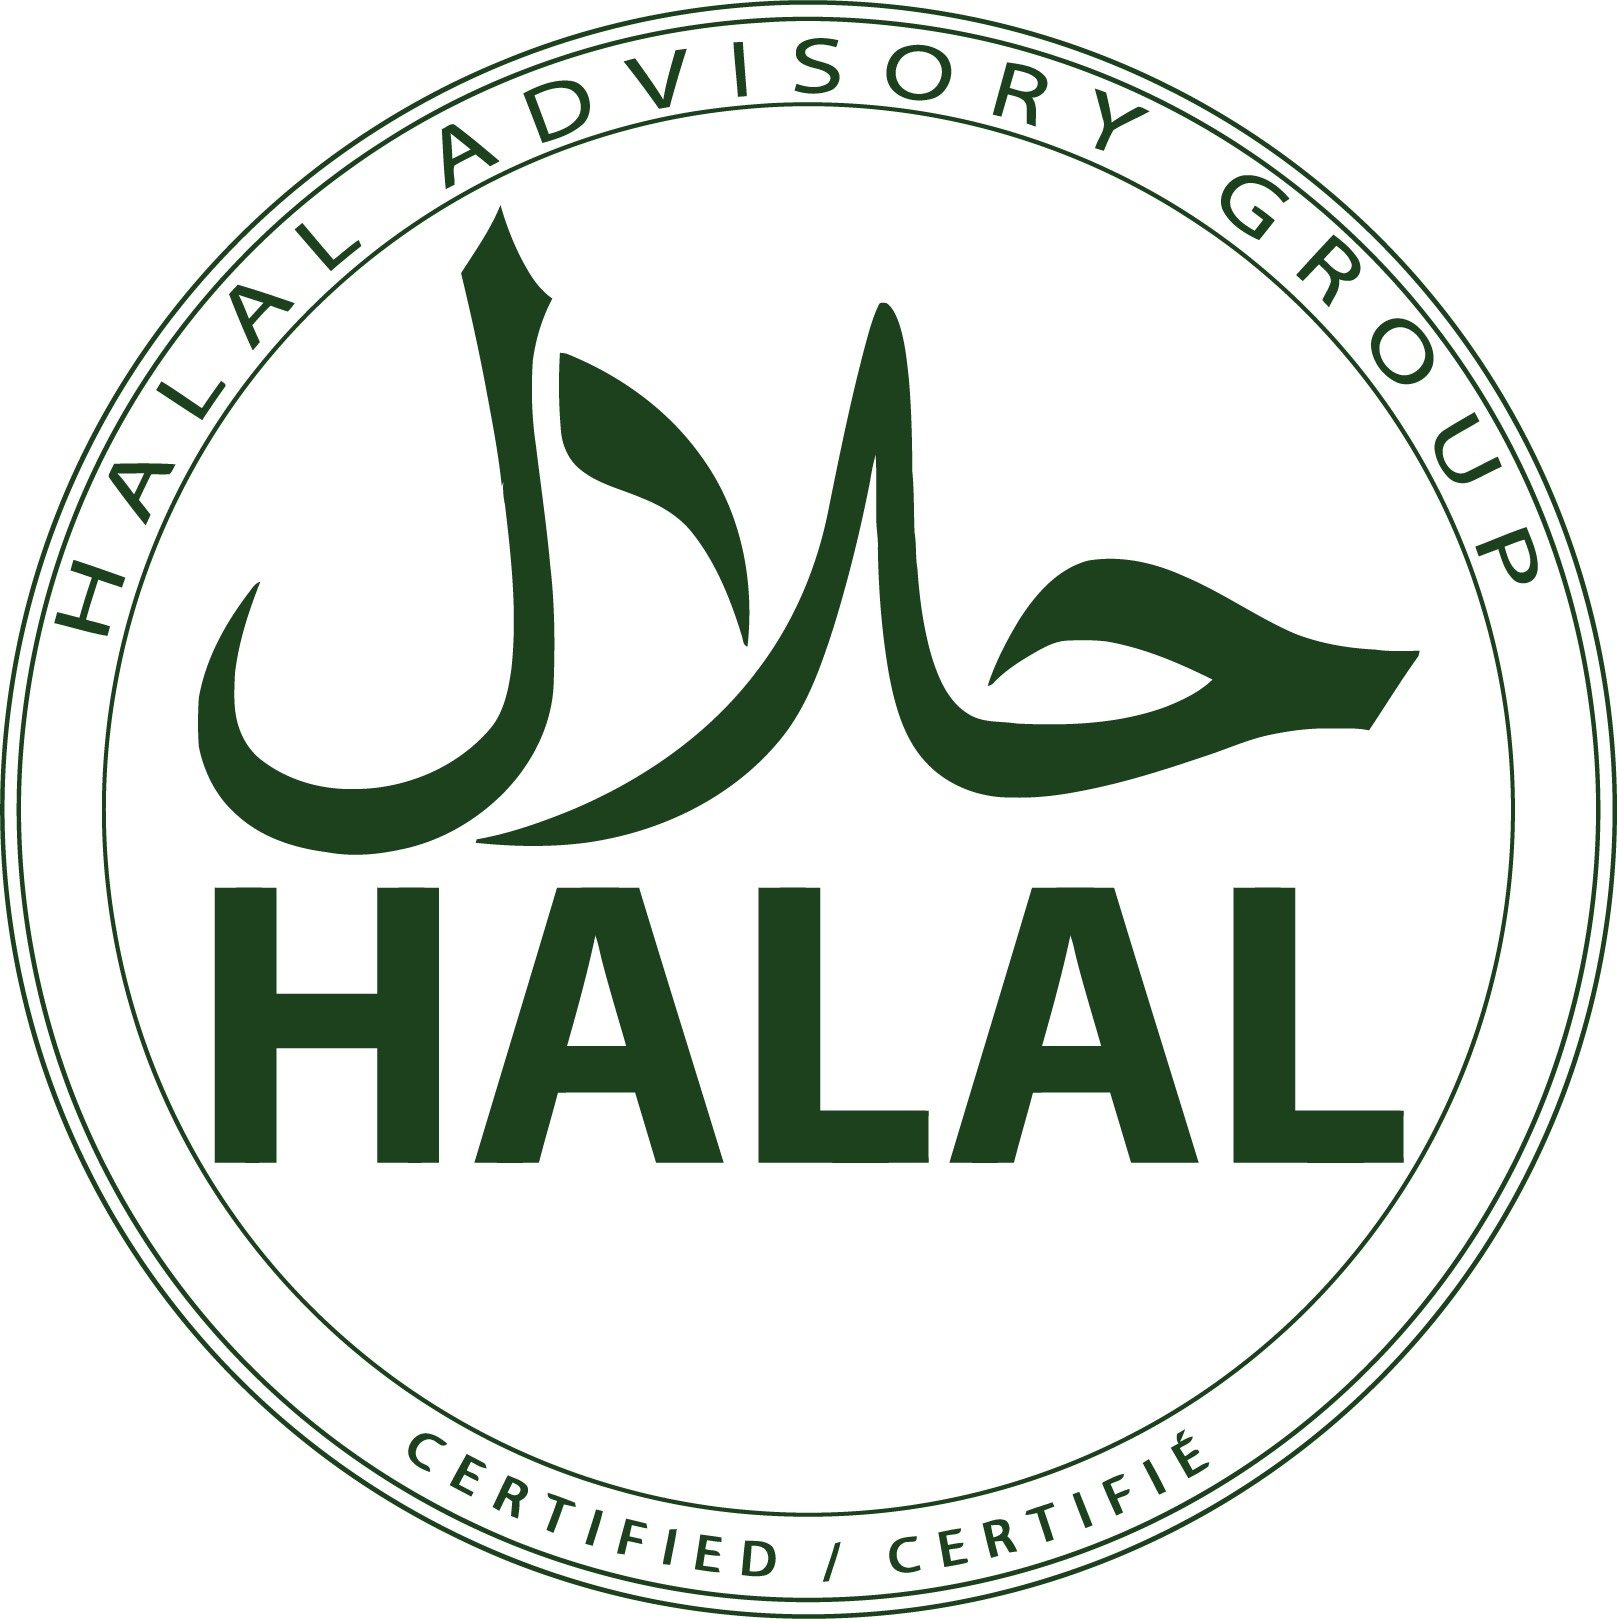 What Exactly Does “Halal” Mean?